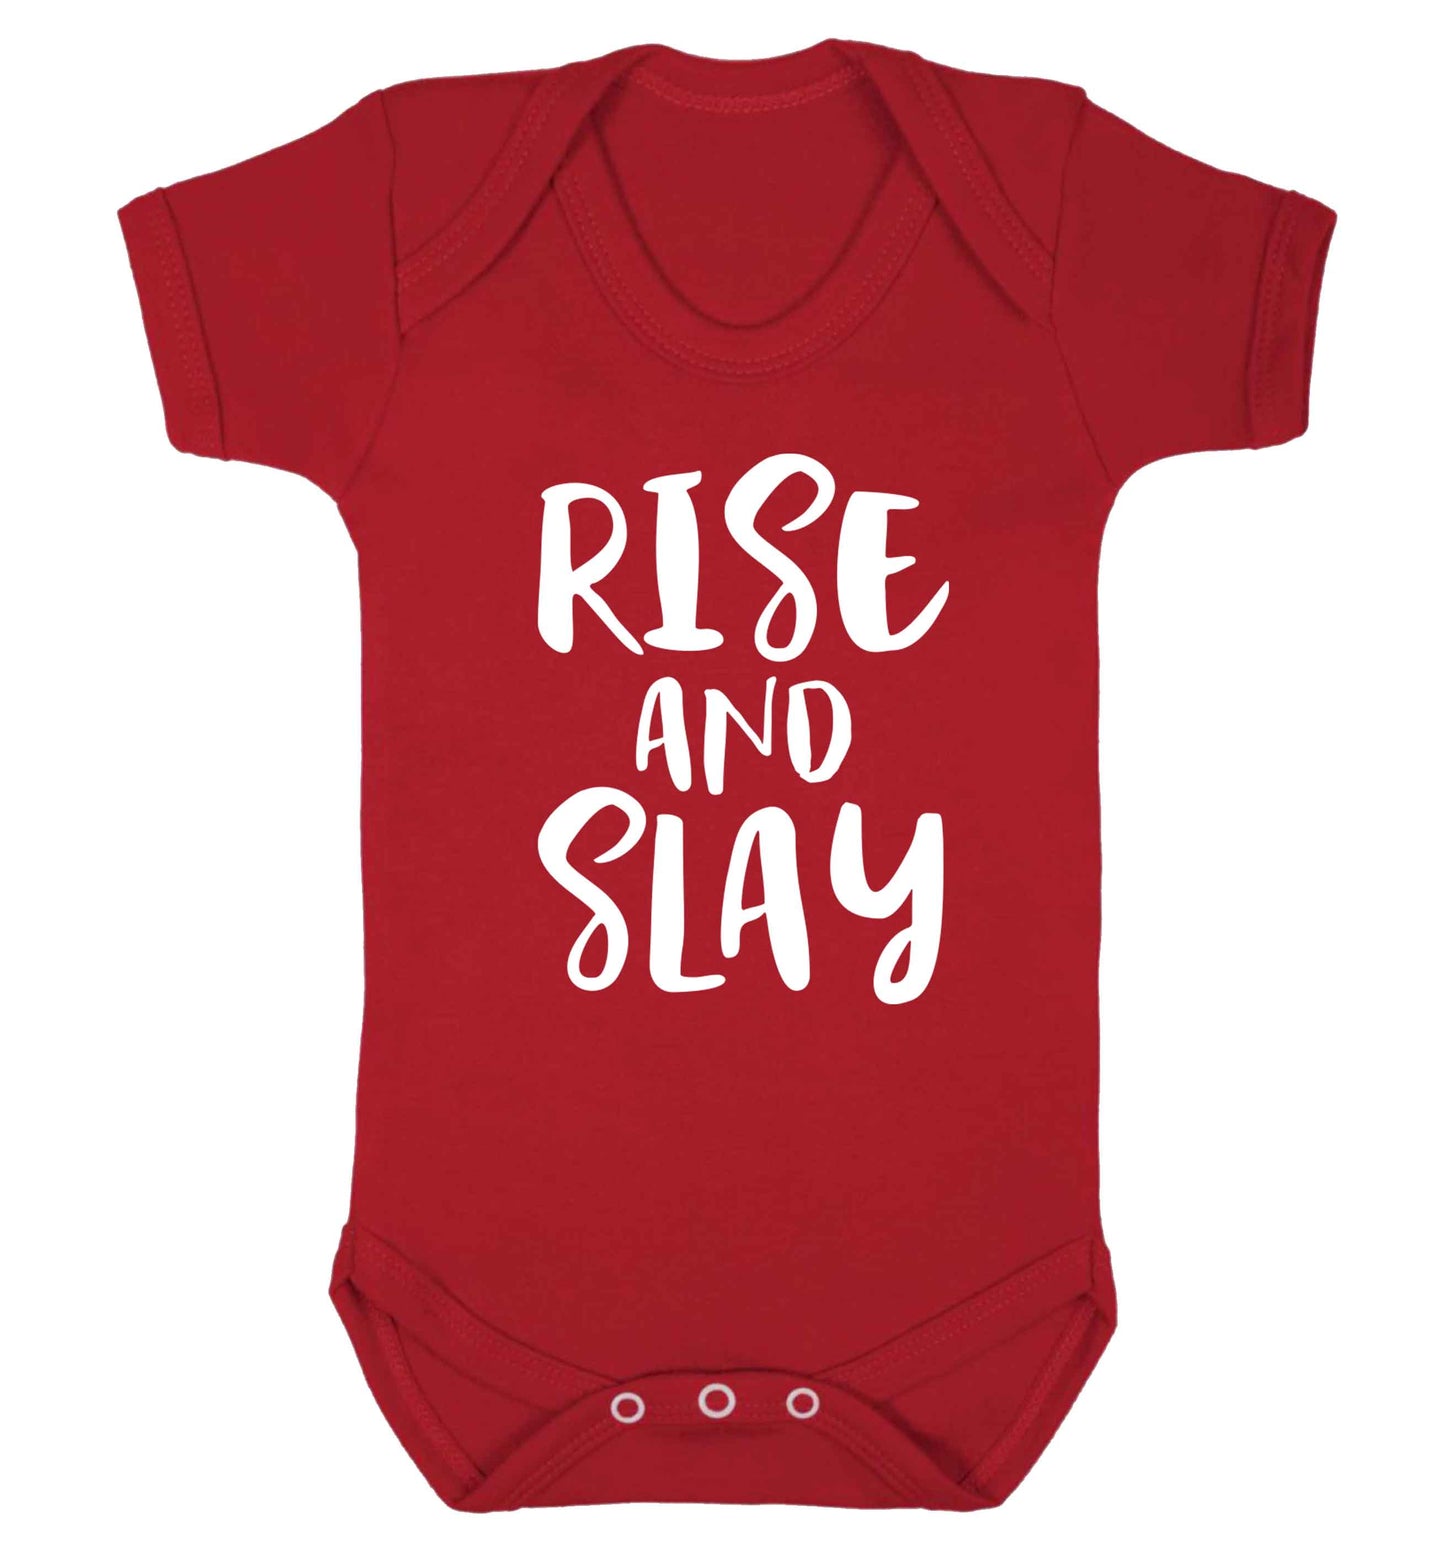 Rise and slay Baby Vest red 18-24 months